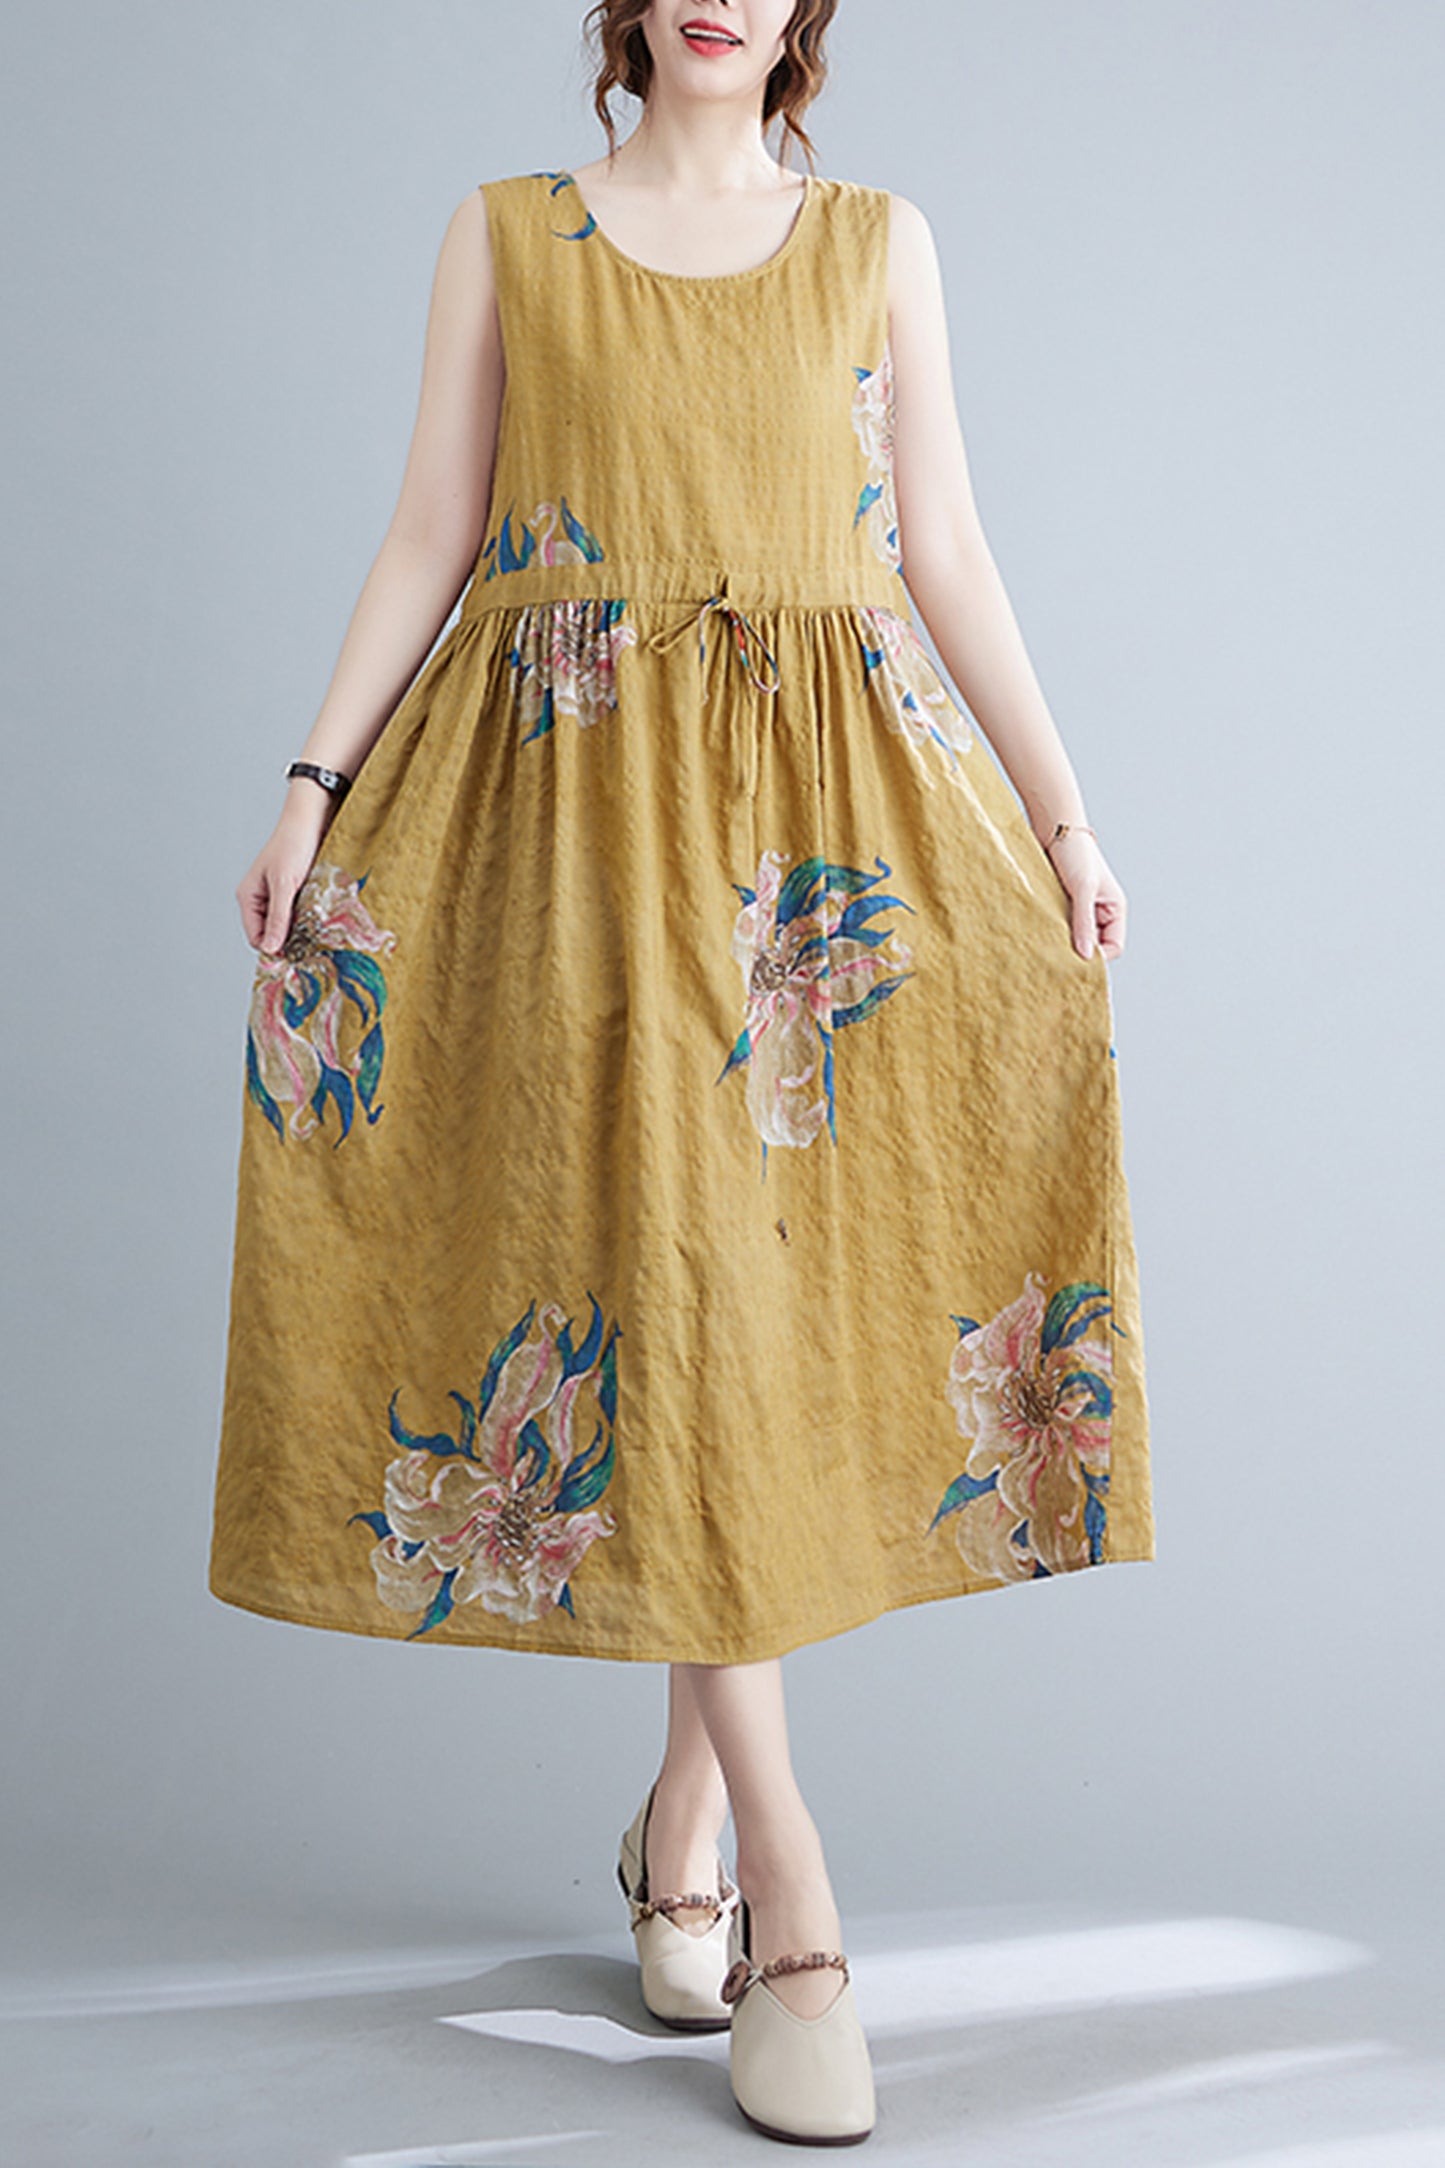 Yellow Floral Print Loose Strappy Dress with Pocket